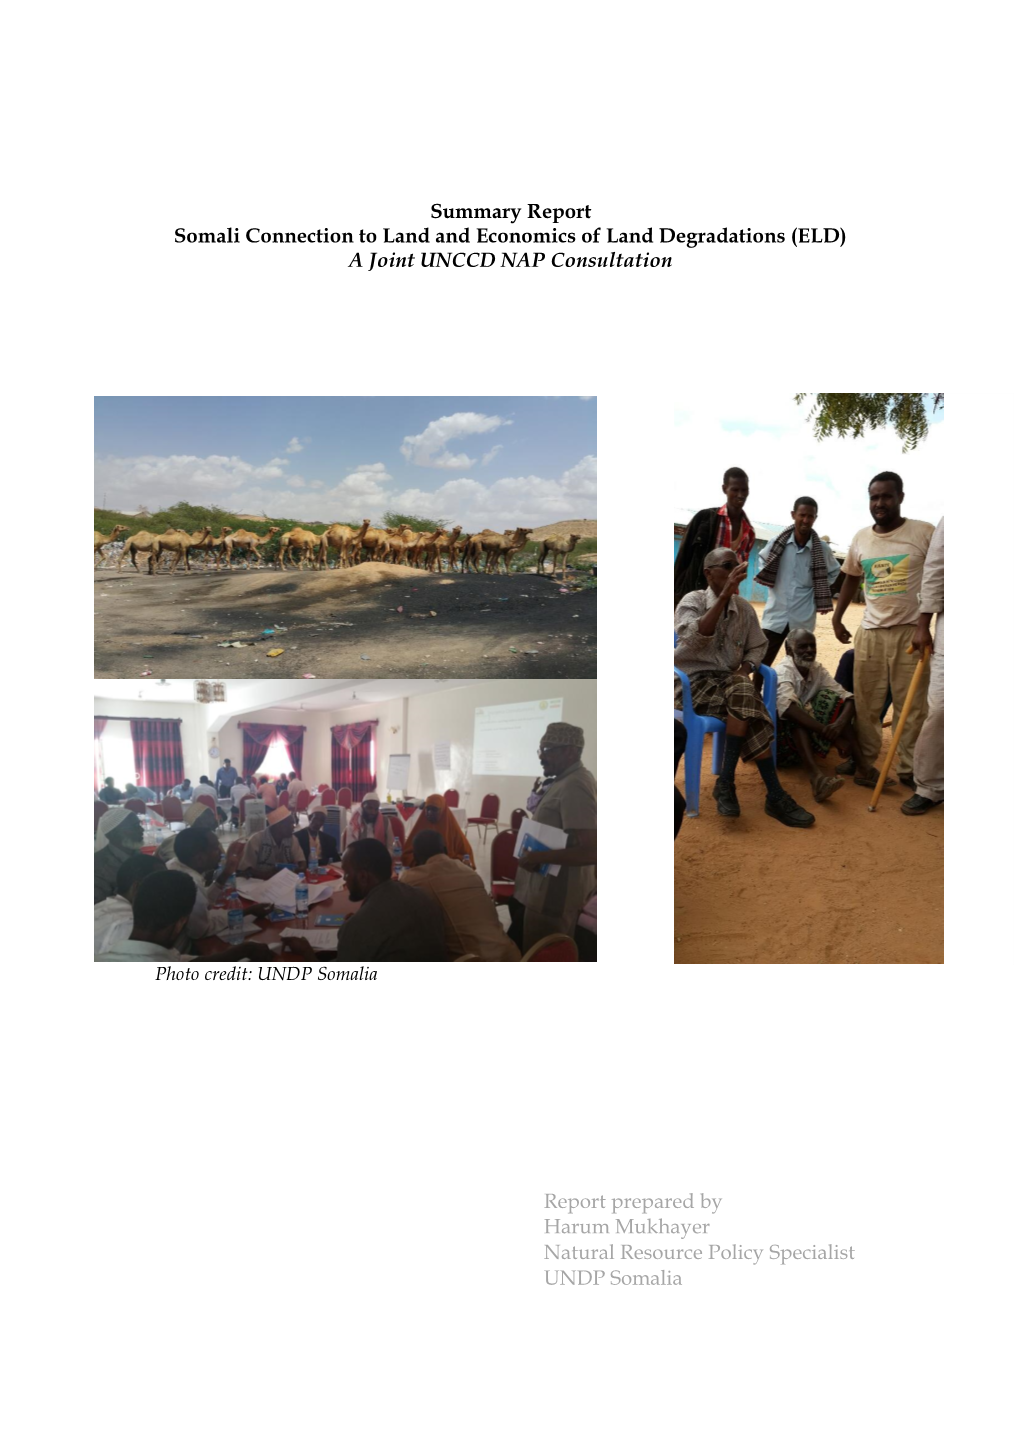 Summary Report Somali Connection to Land and Economics of Land Degradations (ELD) a Joint UNCCD NAP Consultation